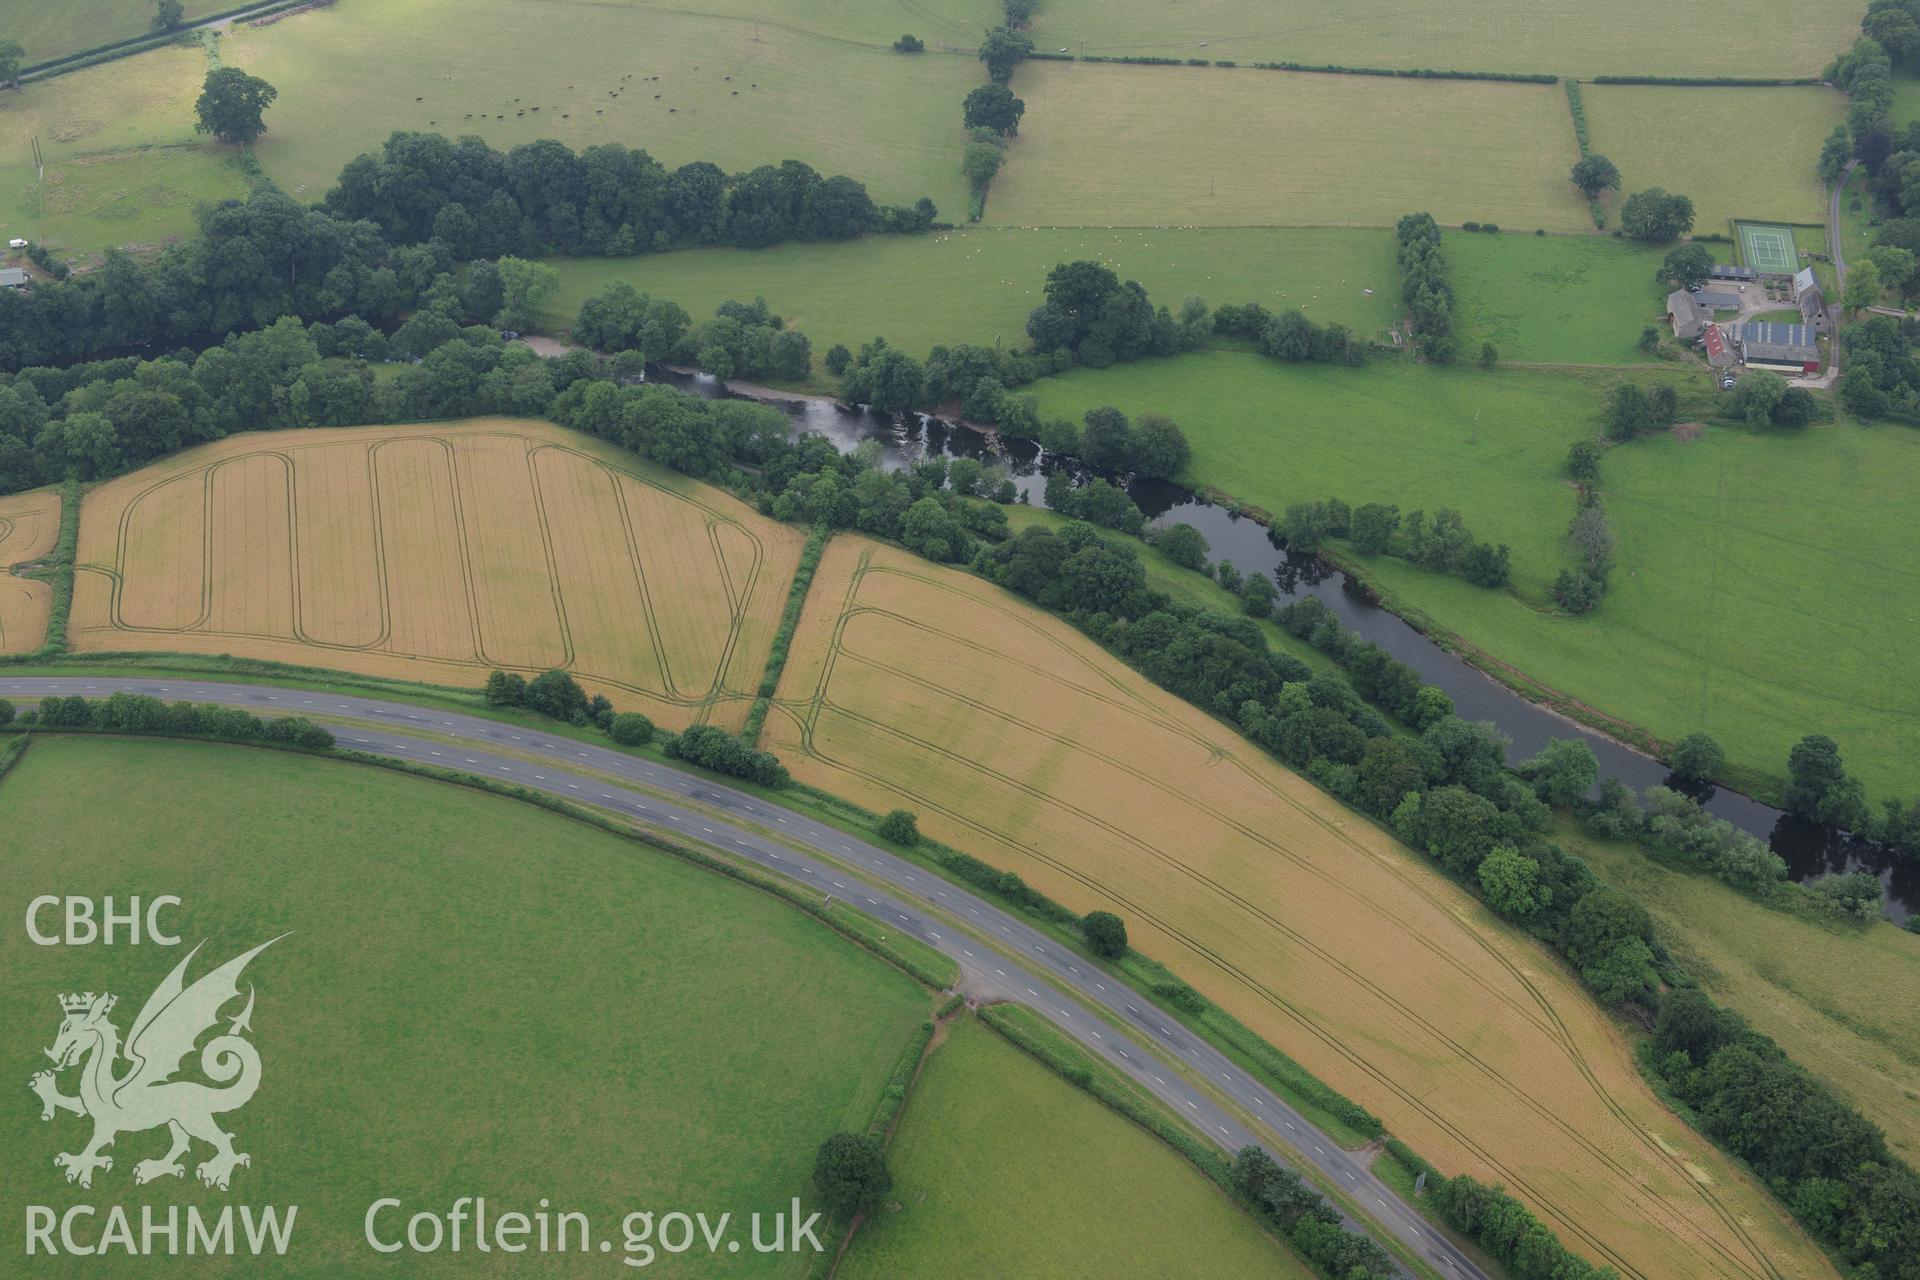 Cefn-brynich Roman fort, general view of cropmarks from north, taken by RCAHMW 1st August 2013.